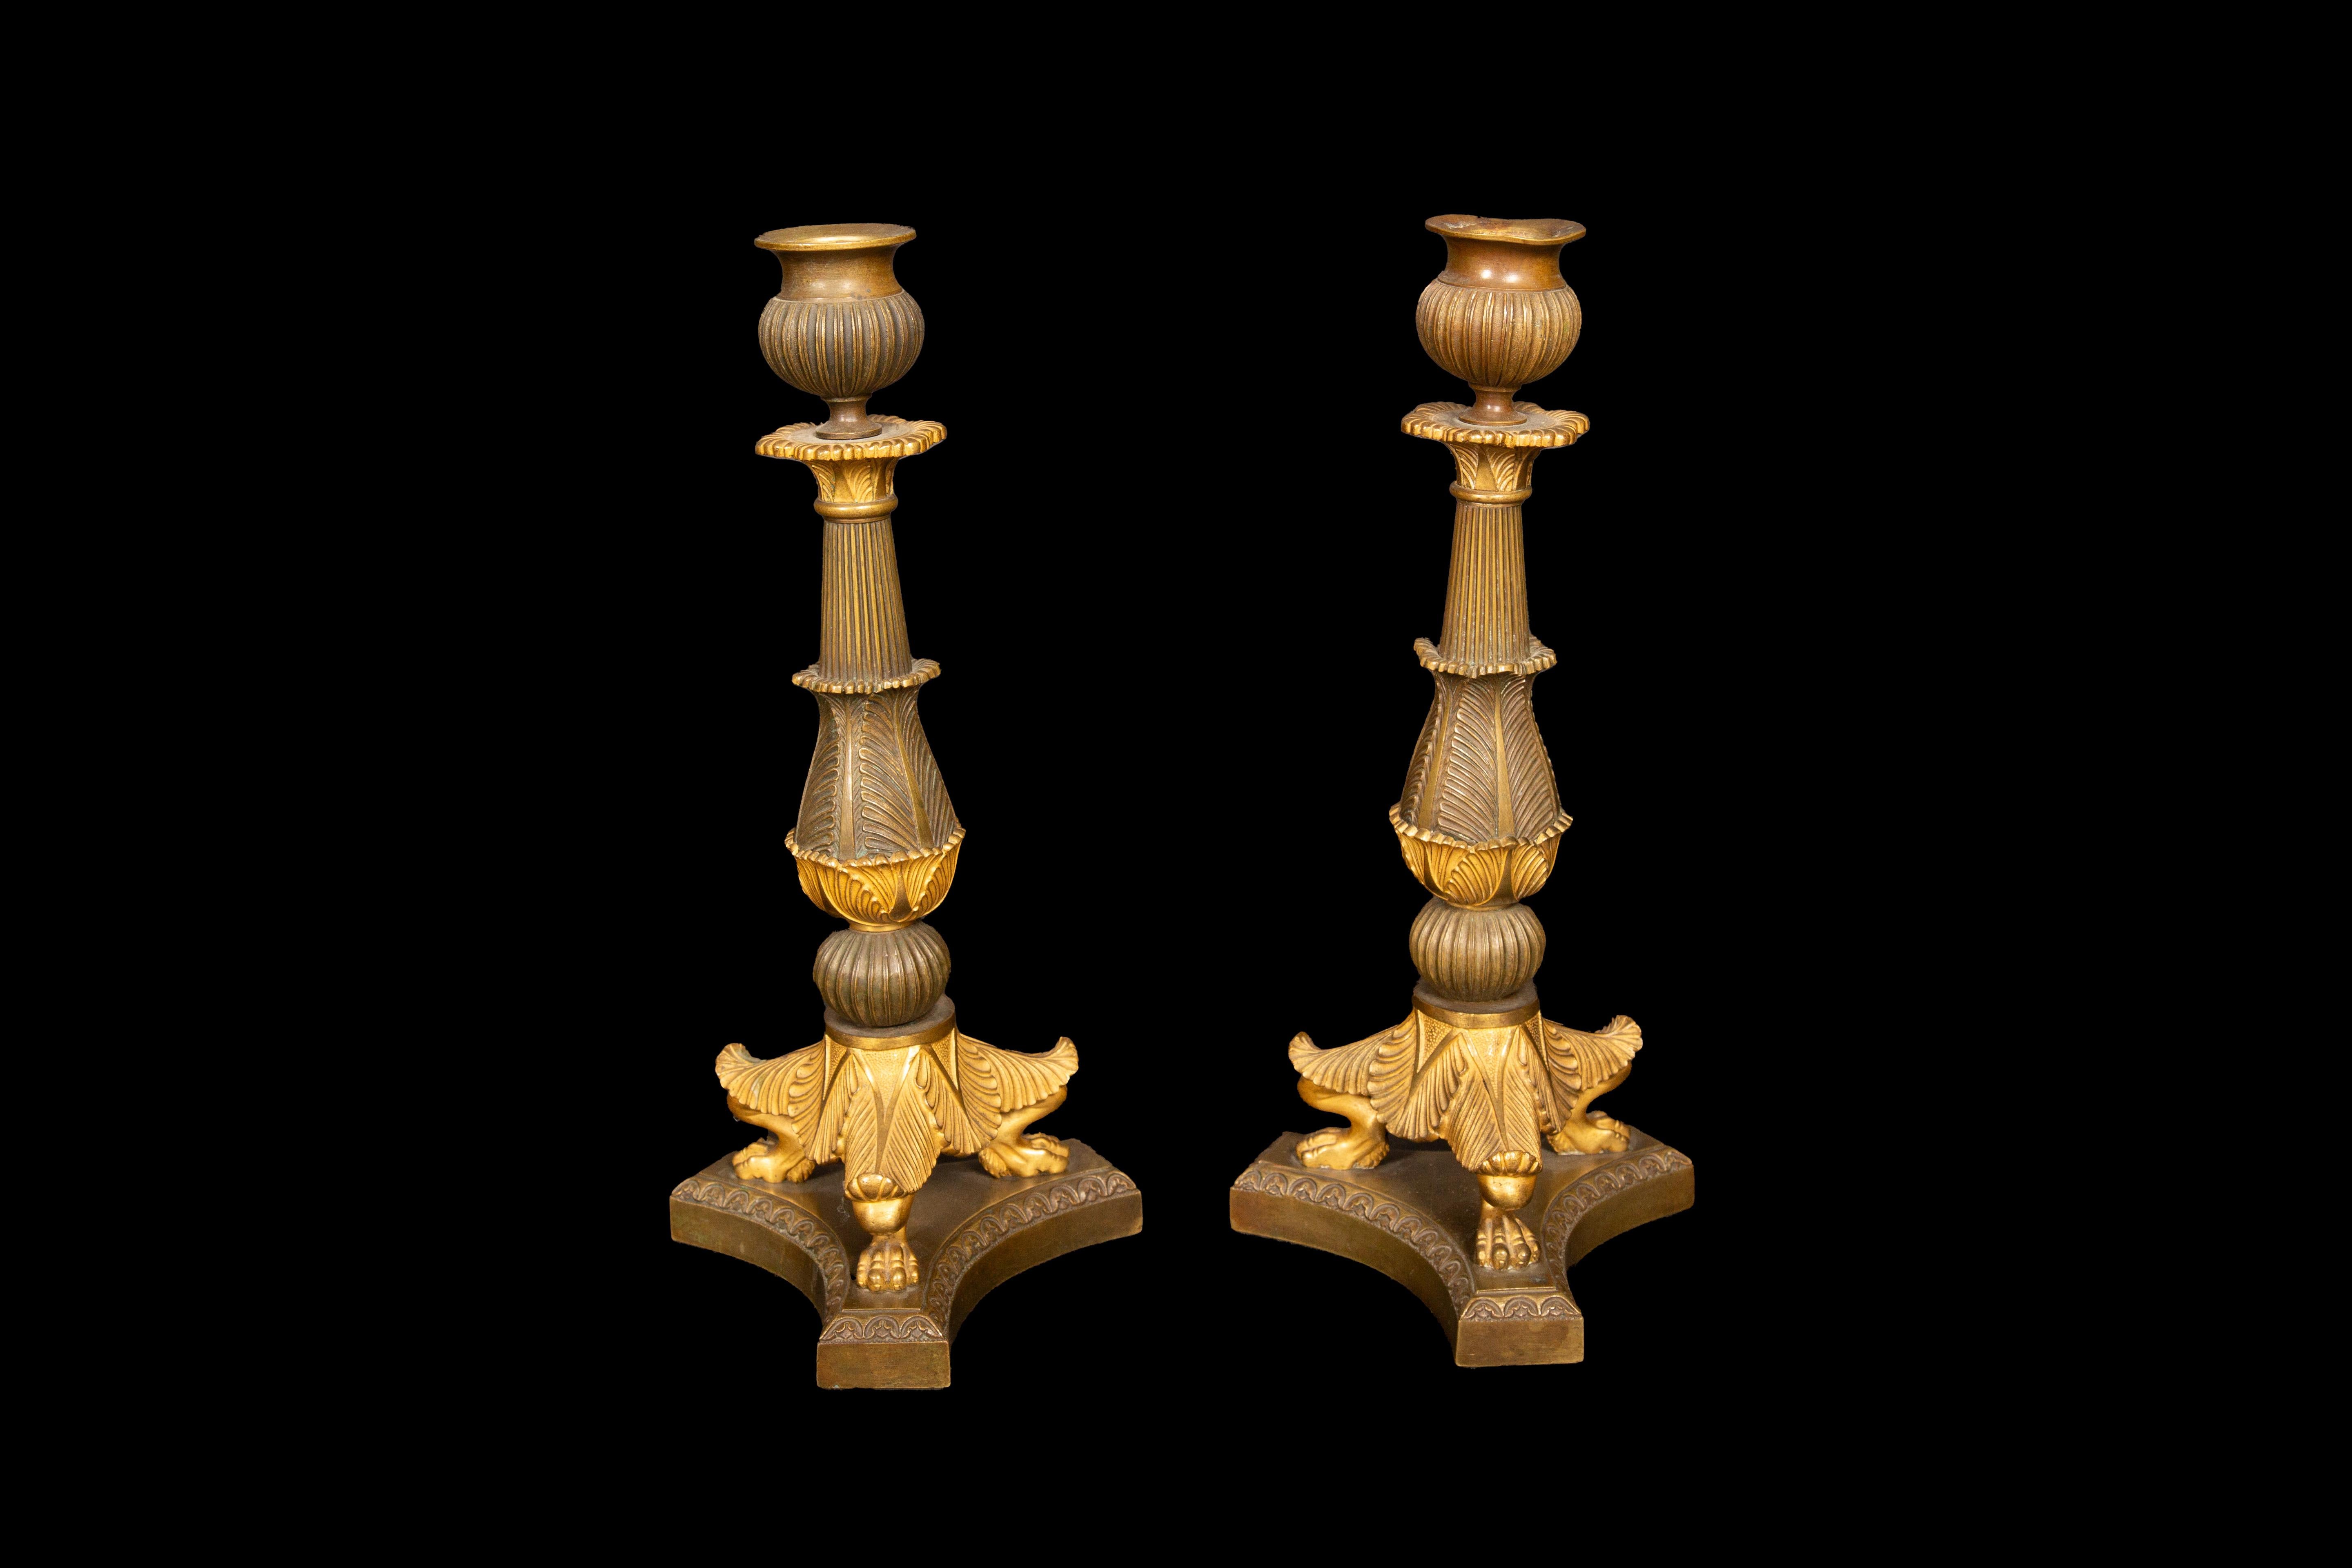 Napoleon III Pair of French Palmette Design Candle Sticks from the 19th Century